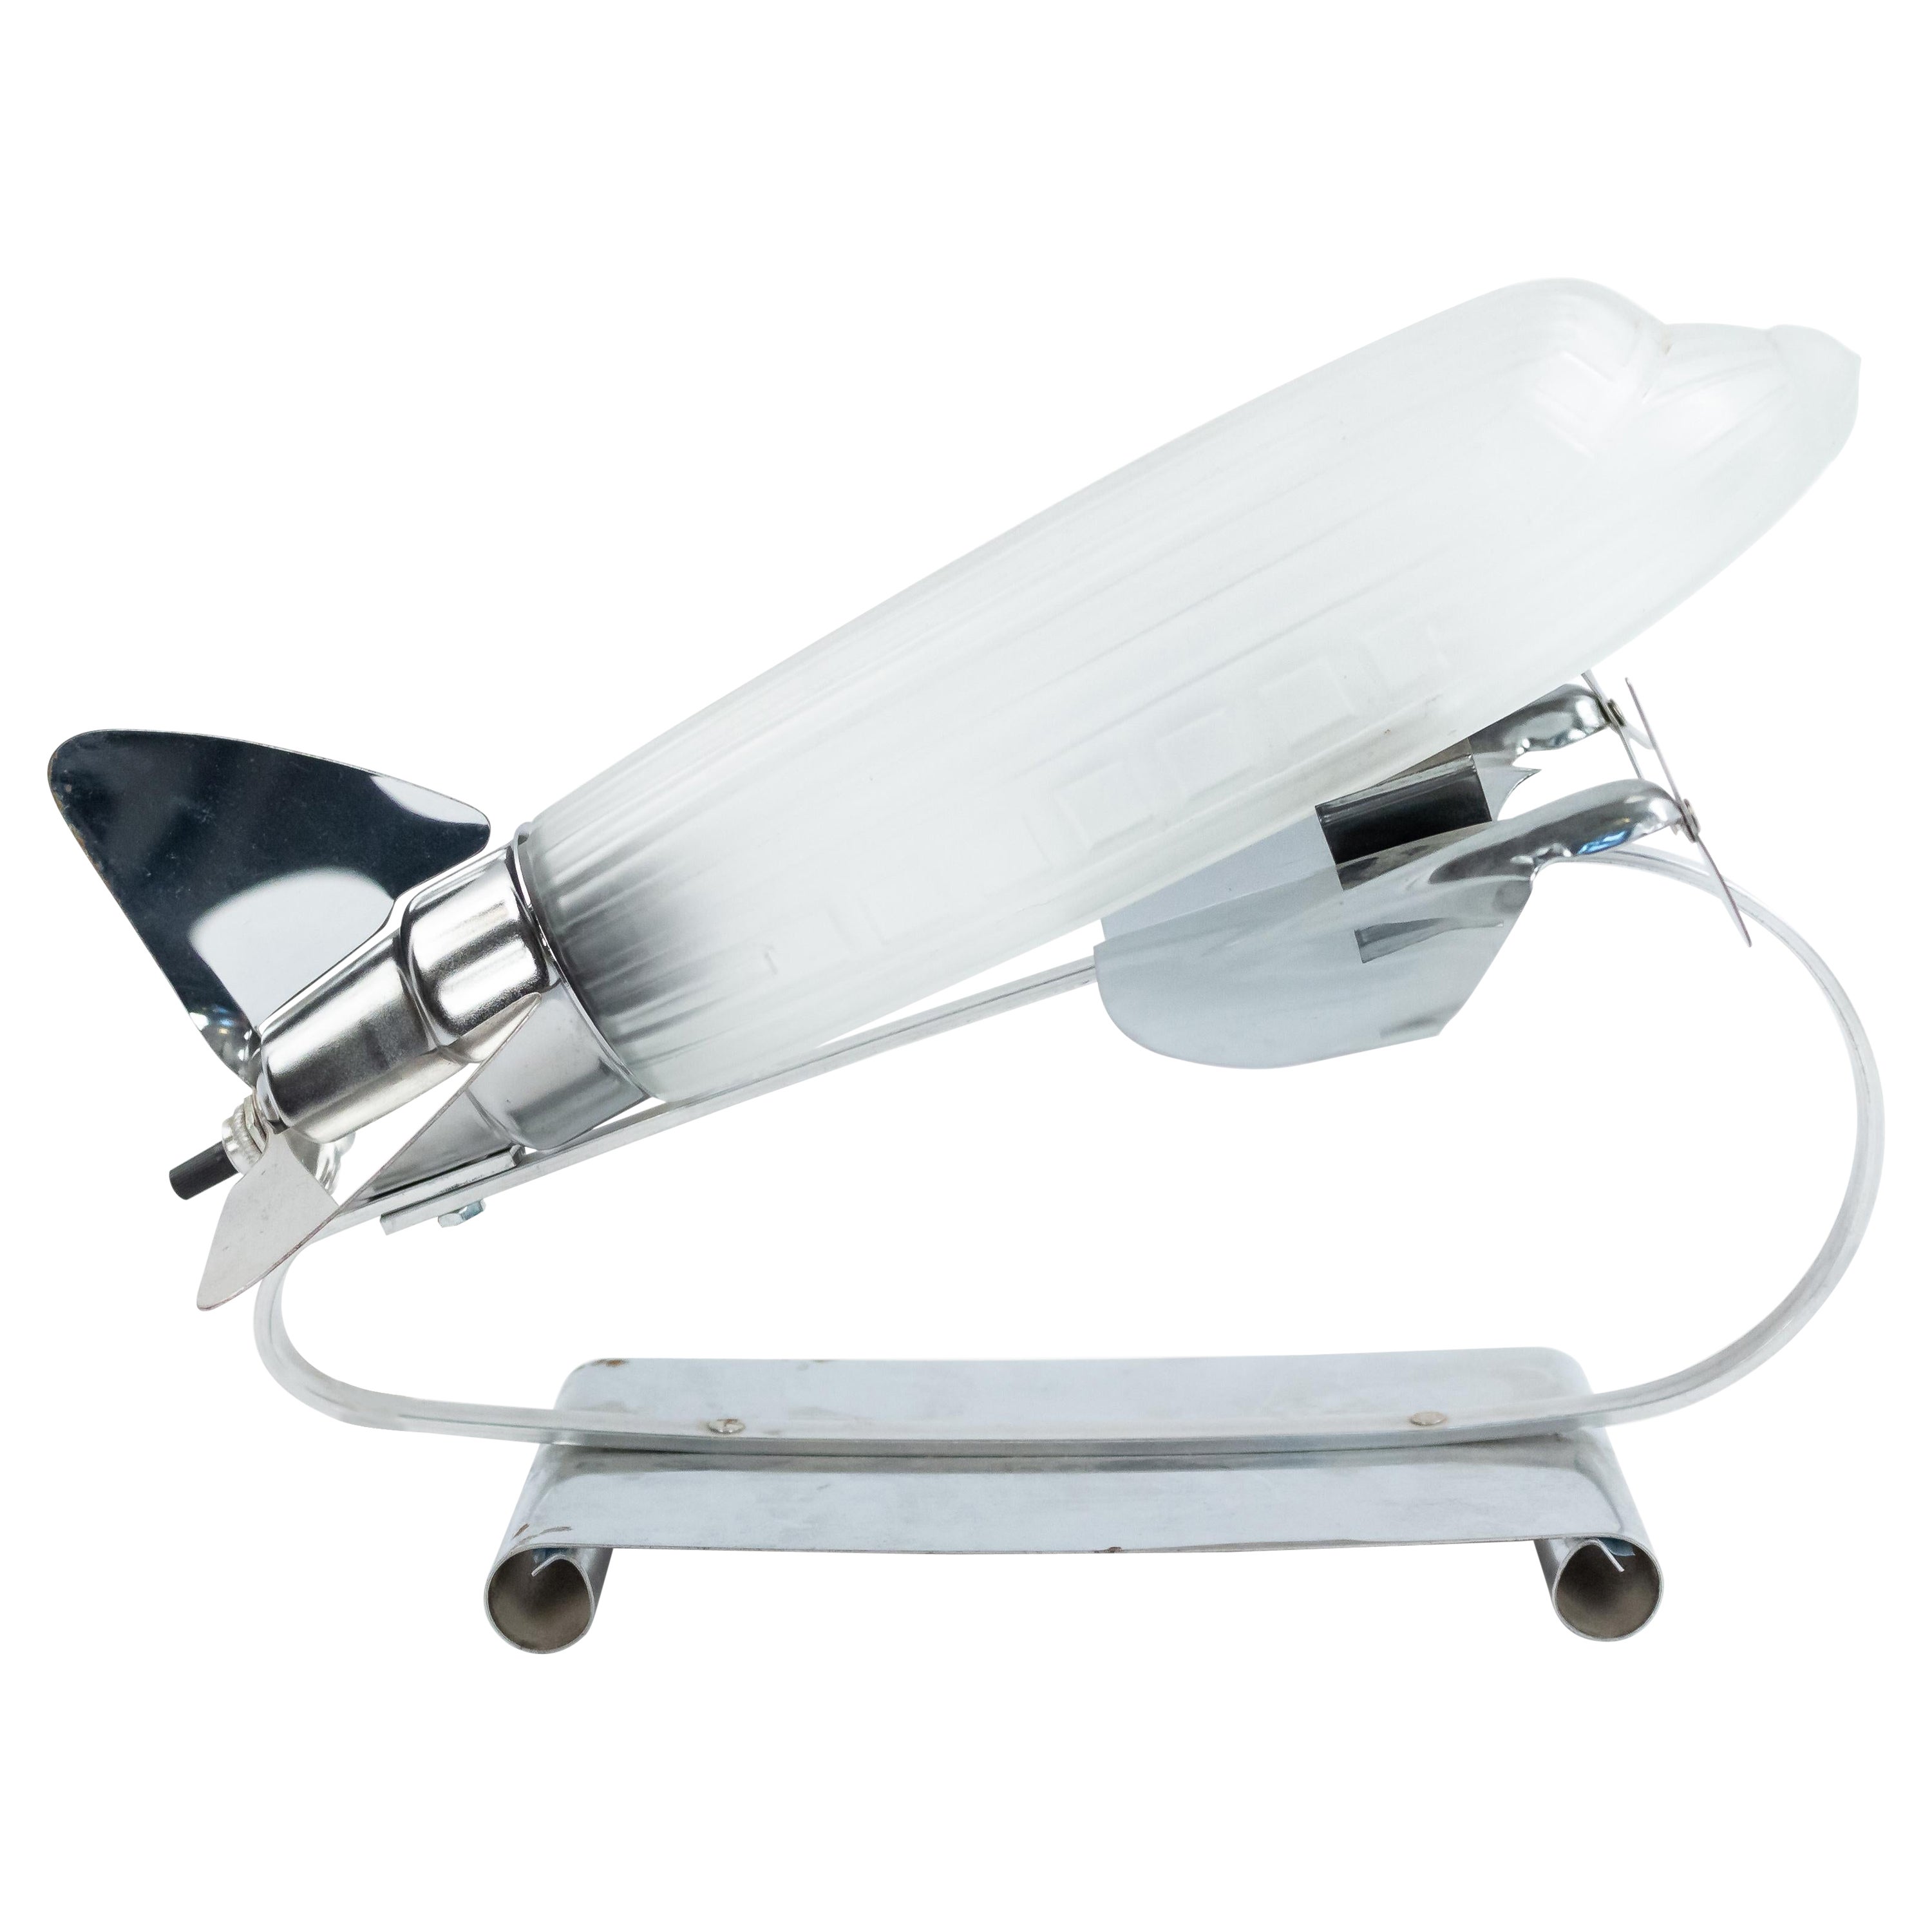 French Art Deco Glass and Chrome Airplane Lamps For Sale